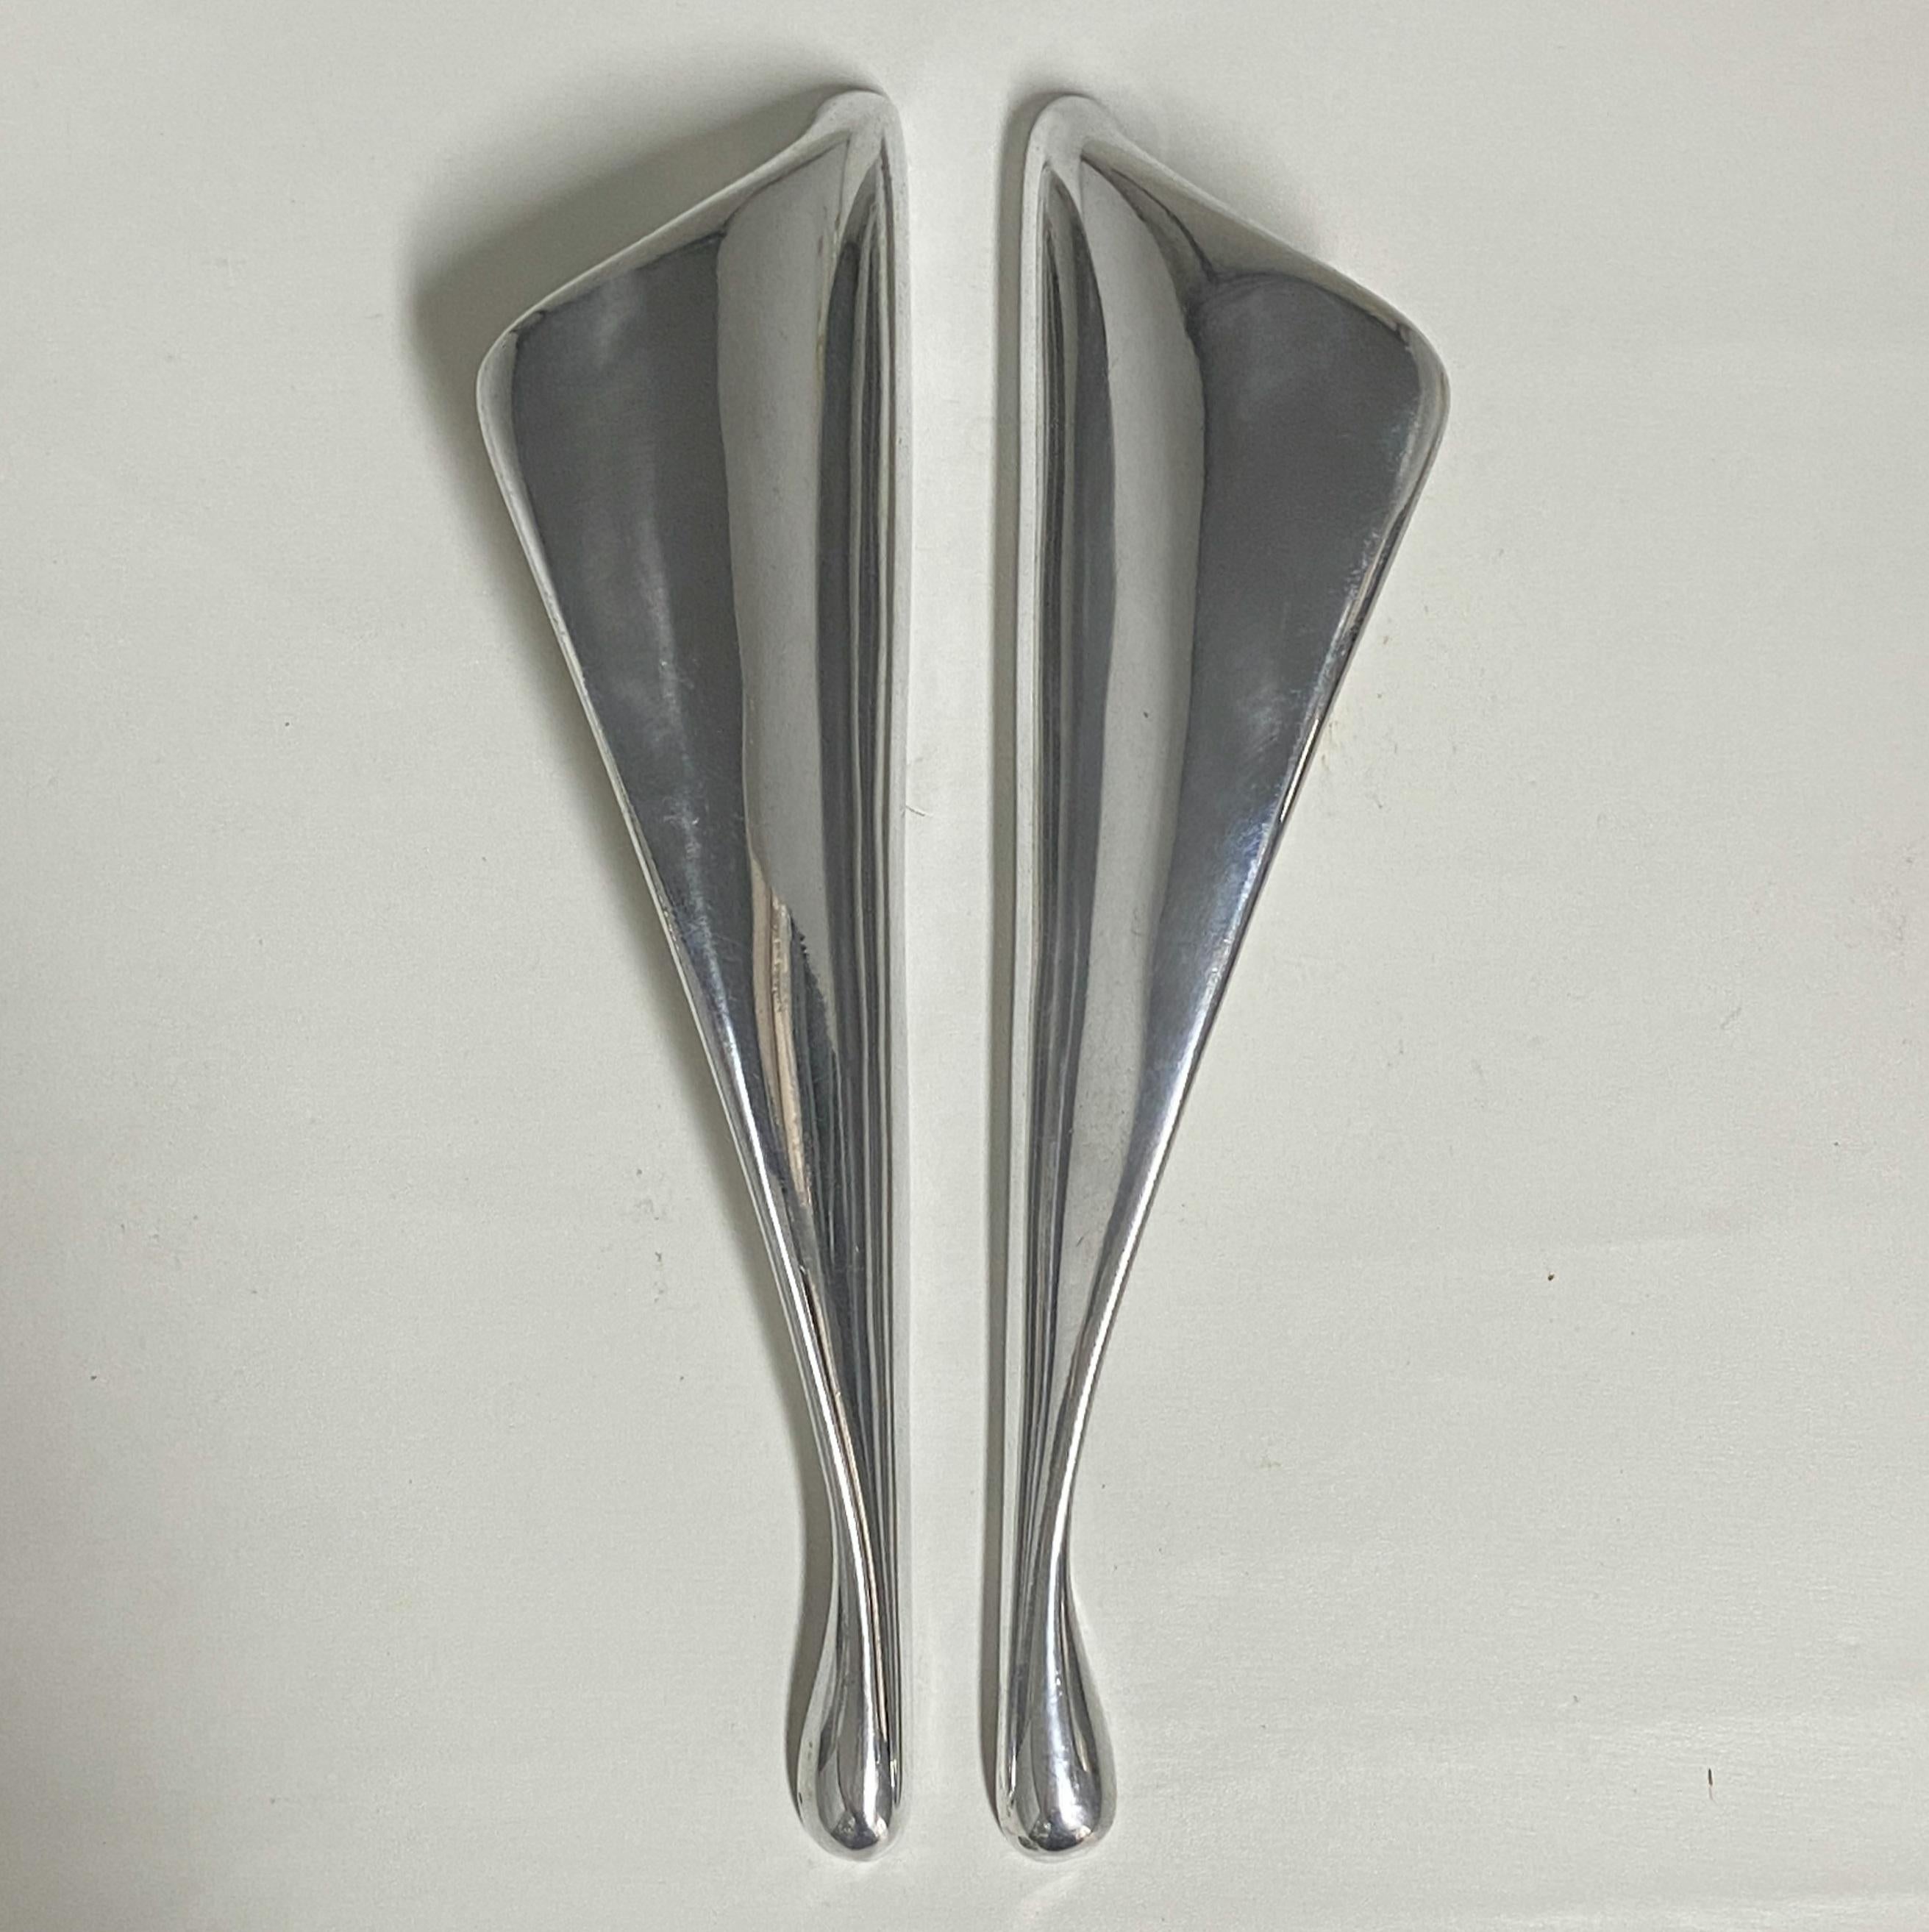 Pair of Mid Century Modern aluminum cast push and pull door handles shaped like wings. 
They will work inside or outside any contemporary building today. They can be used on furniture as well as on entry doors.
View all our listings by The Moderns,